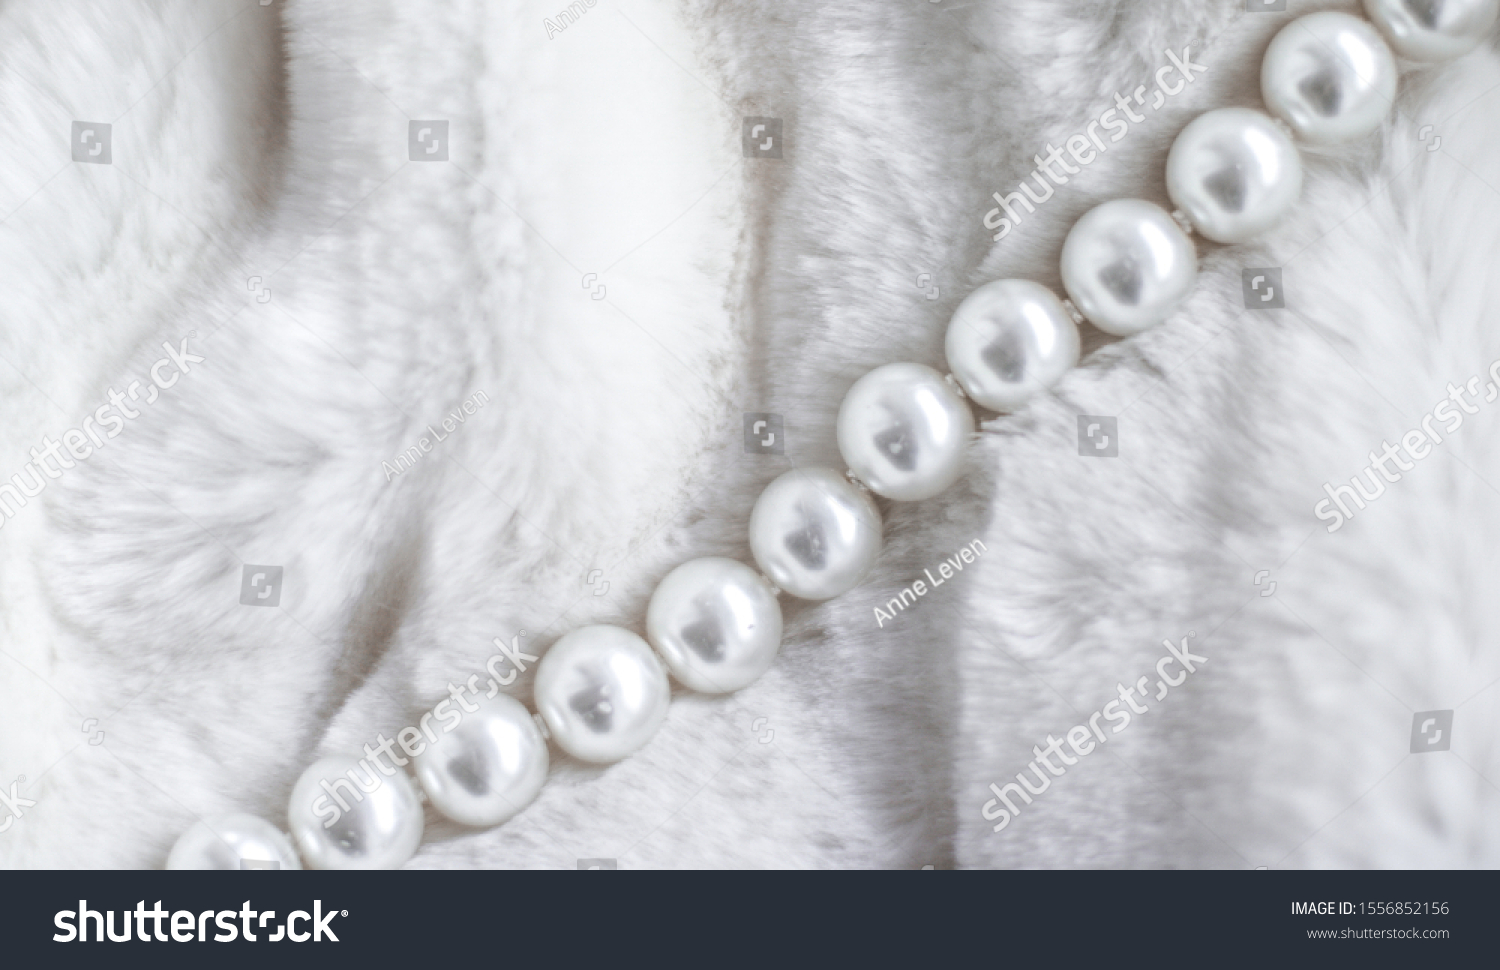 Jewelry branding, elegance and sale concept - Winter holiday jewellery fashion, pearl necklace on fur background, glamour style present and chic gift for luxury jewelery brand shopping, banner design #1556852156